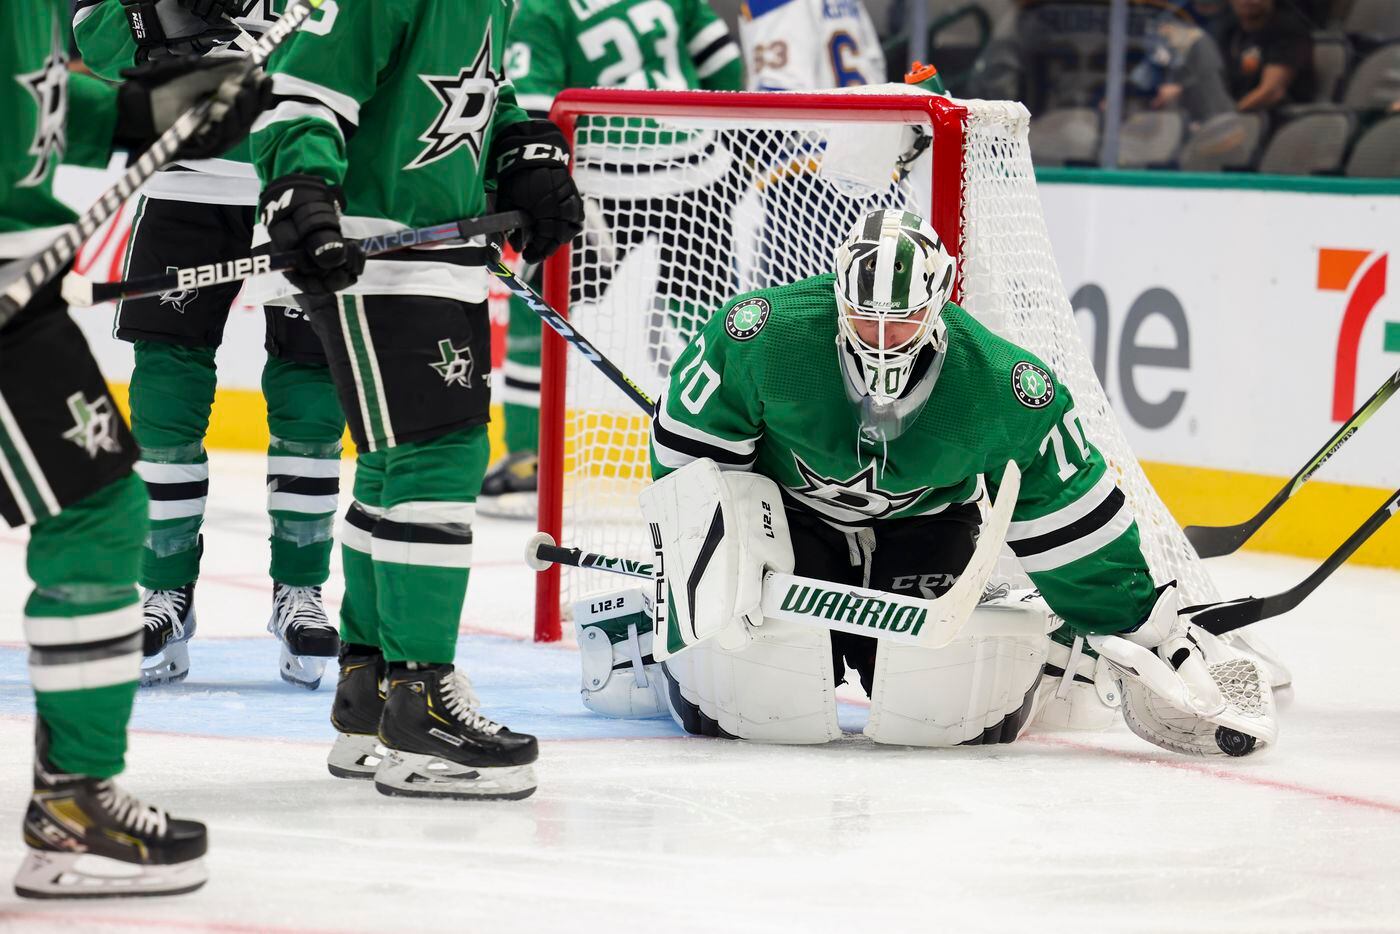 Dallas Stars goaltender Braden Holtby (70) blocks a St. Louis Blues goal during the second period of a Dallas Stars preseason game against St. Louis Blues on Tuesday, Oct. 5, 2021, at American Airlines Center in Dallas. (Juan Figueroa/The Dallas Morning News)